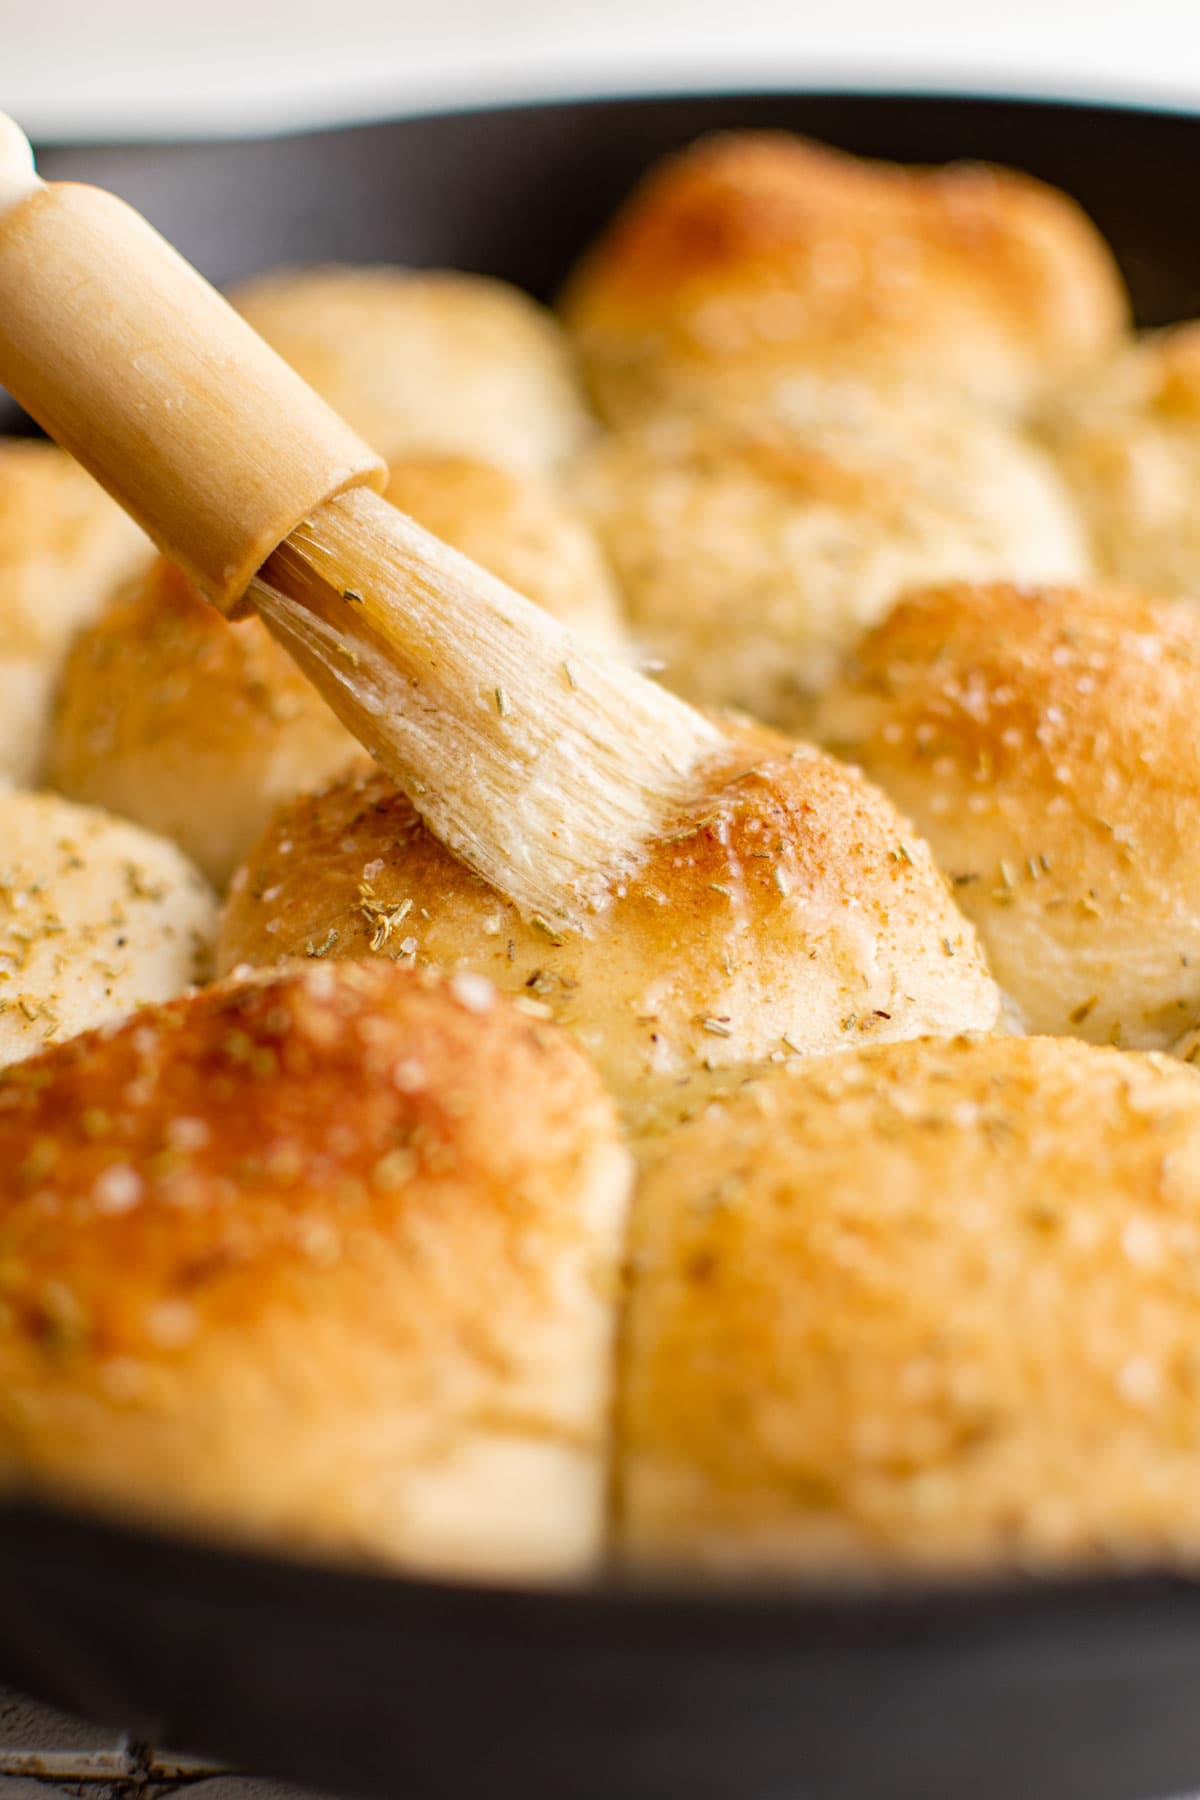 Baked frozen dinner rolls in a skillet with a pastry brush and butter.